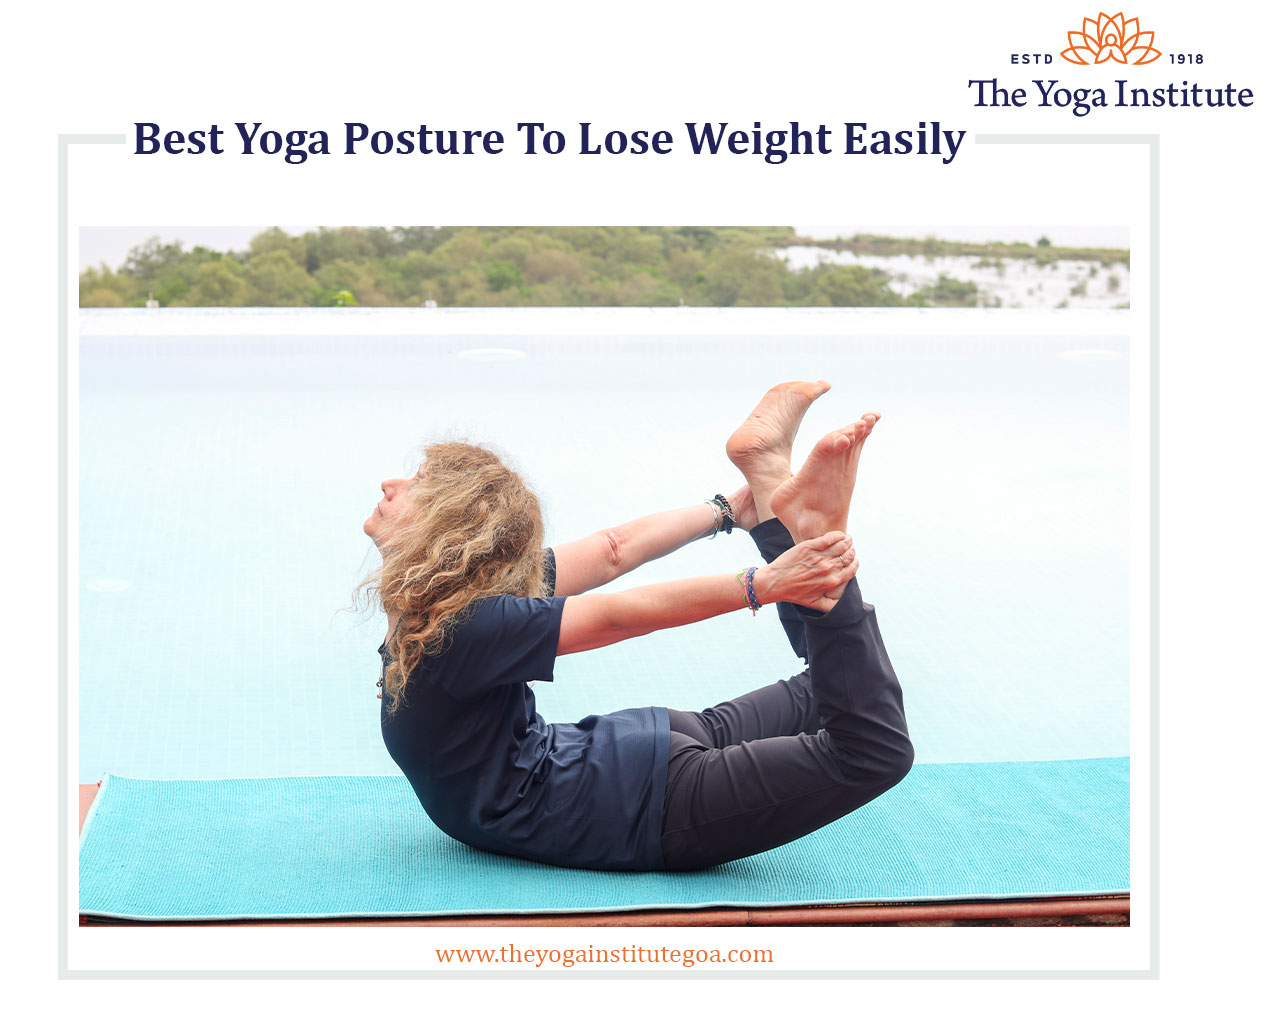 Best Yoga Posture To Lose Weight Easily